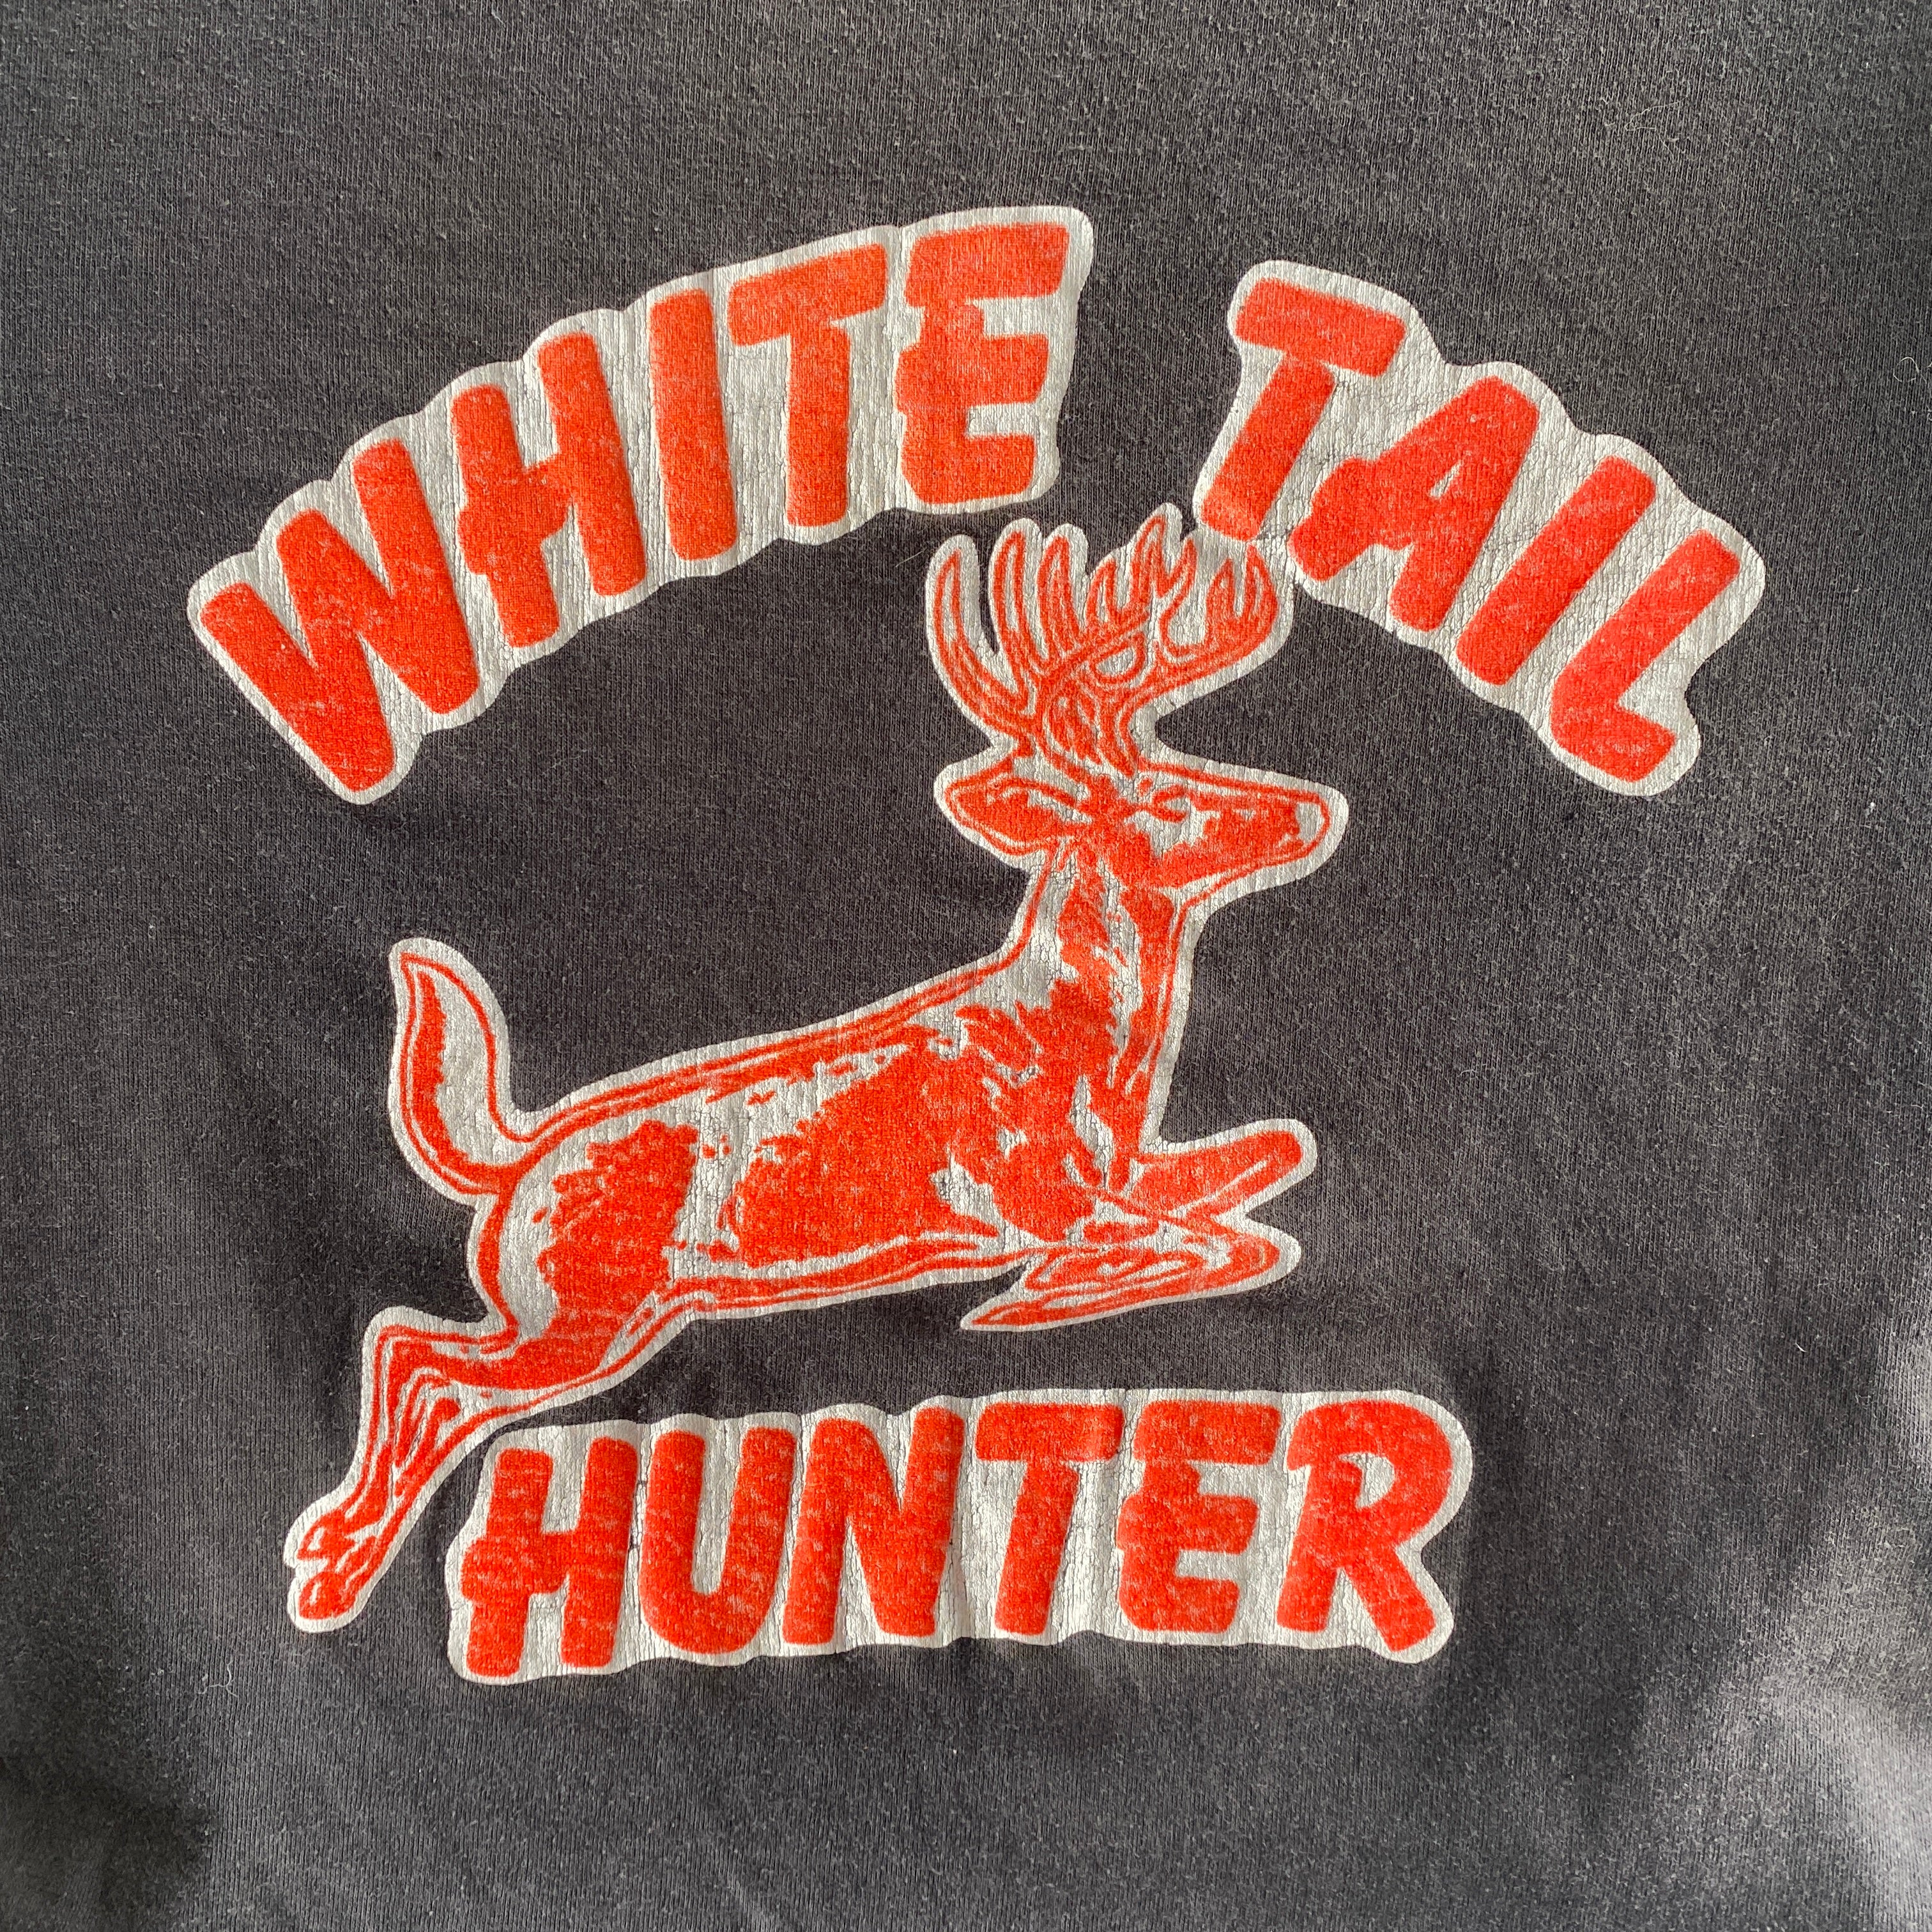 1970s White Tail Hunter Rolled Neck Very Small T-Shirt